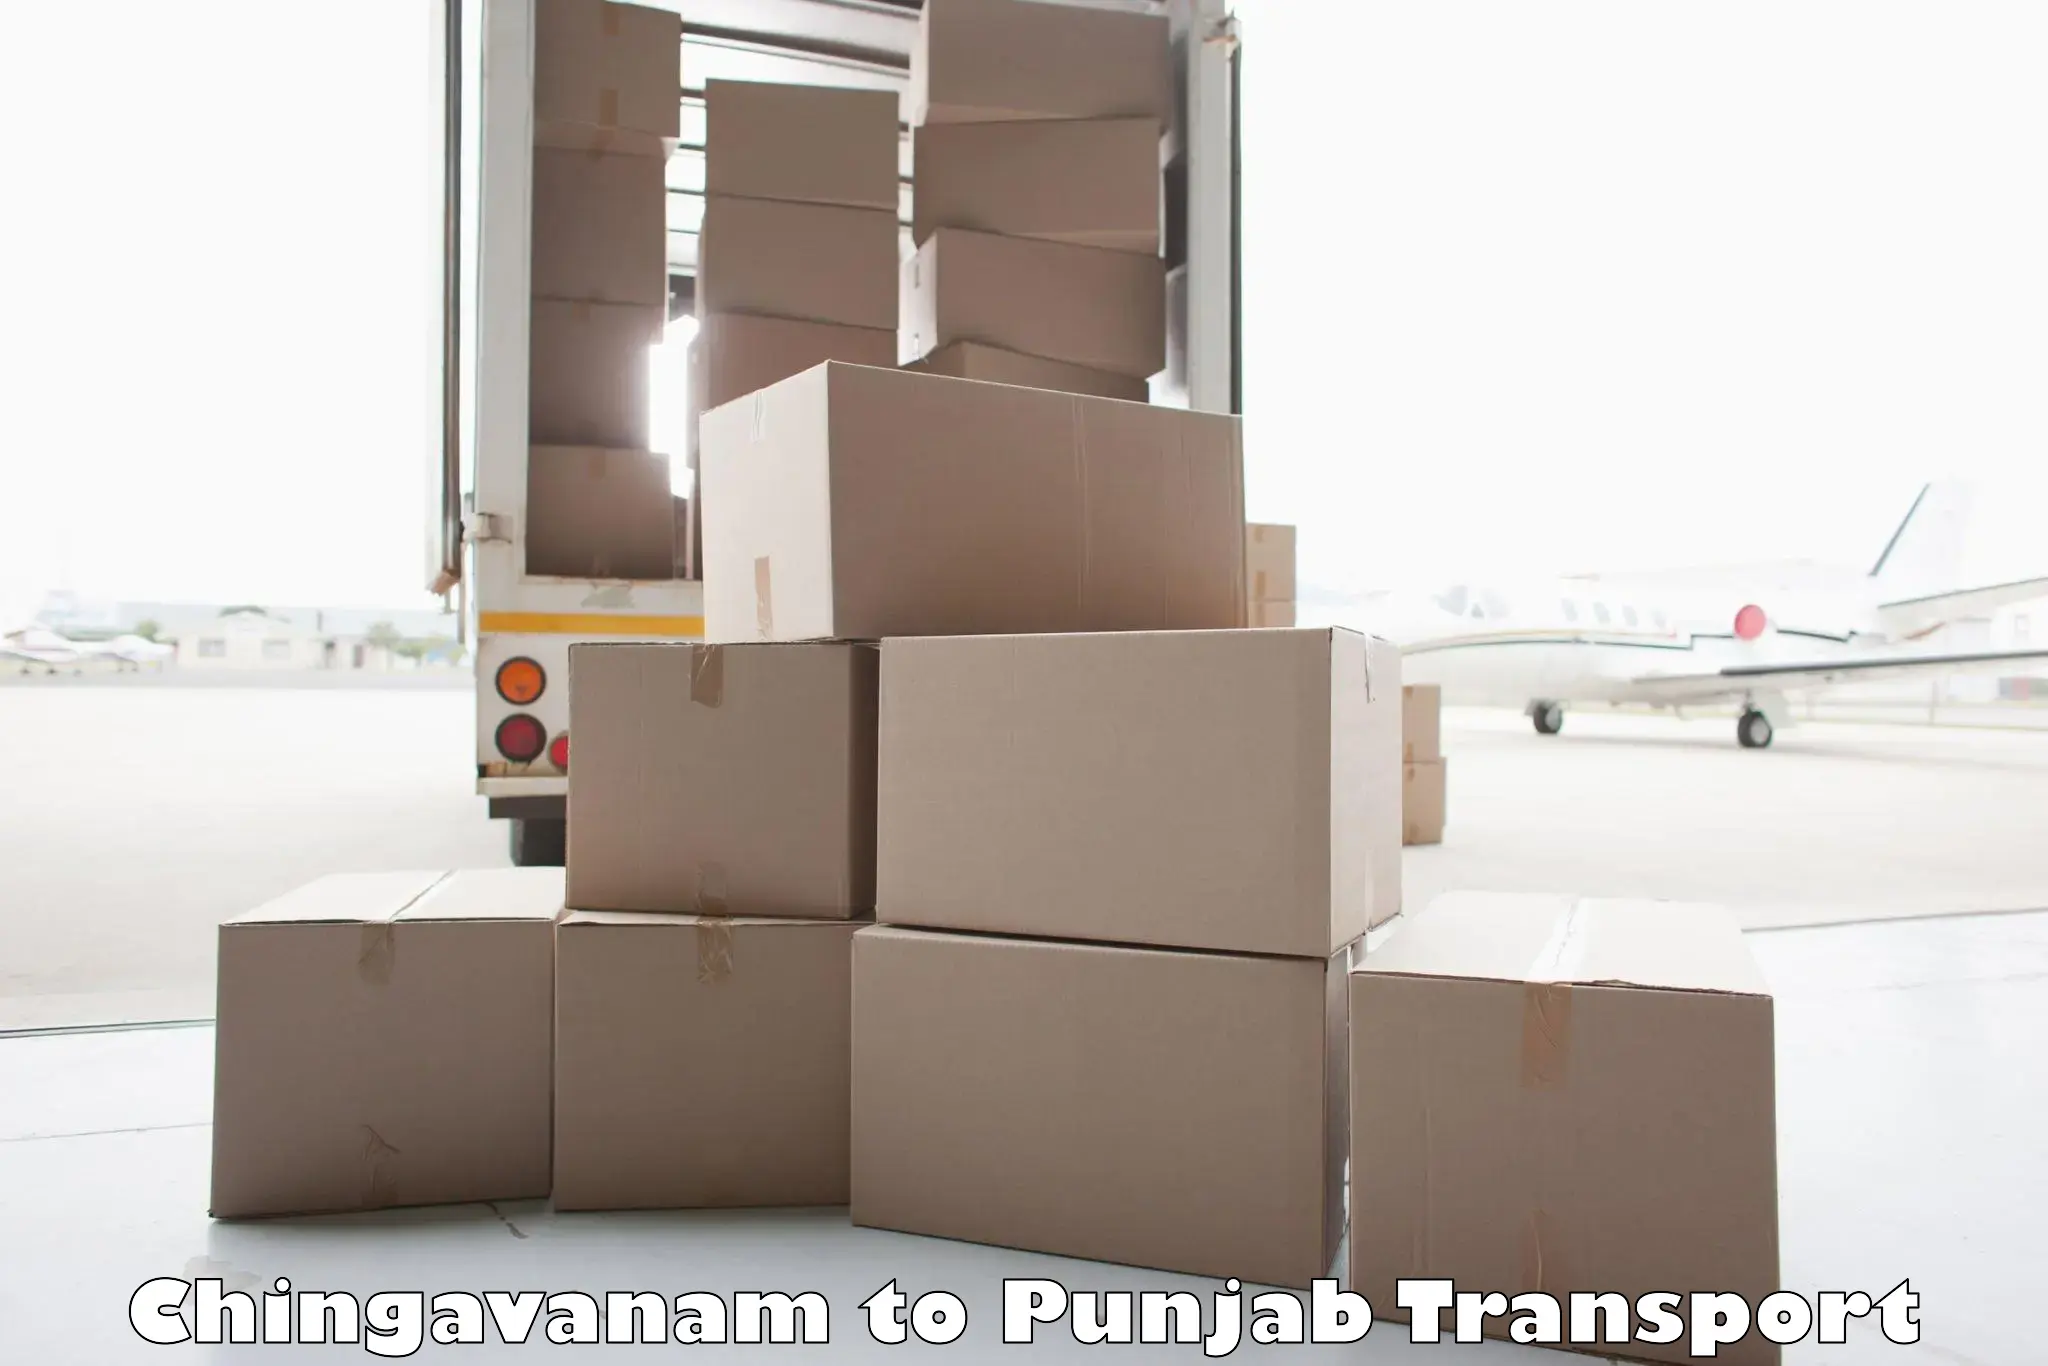 Cargo transport services Chingavanam to Pathankot